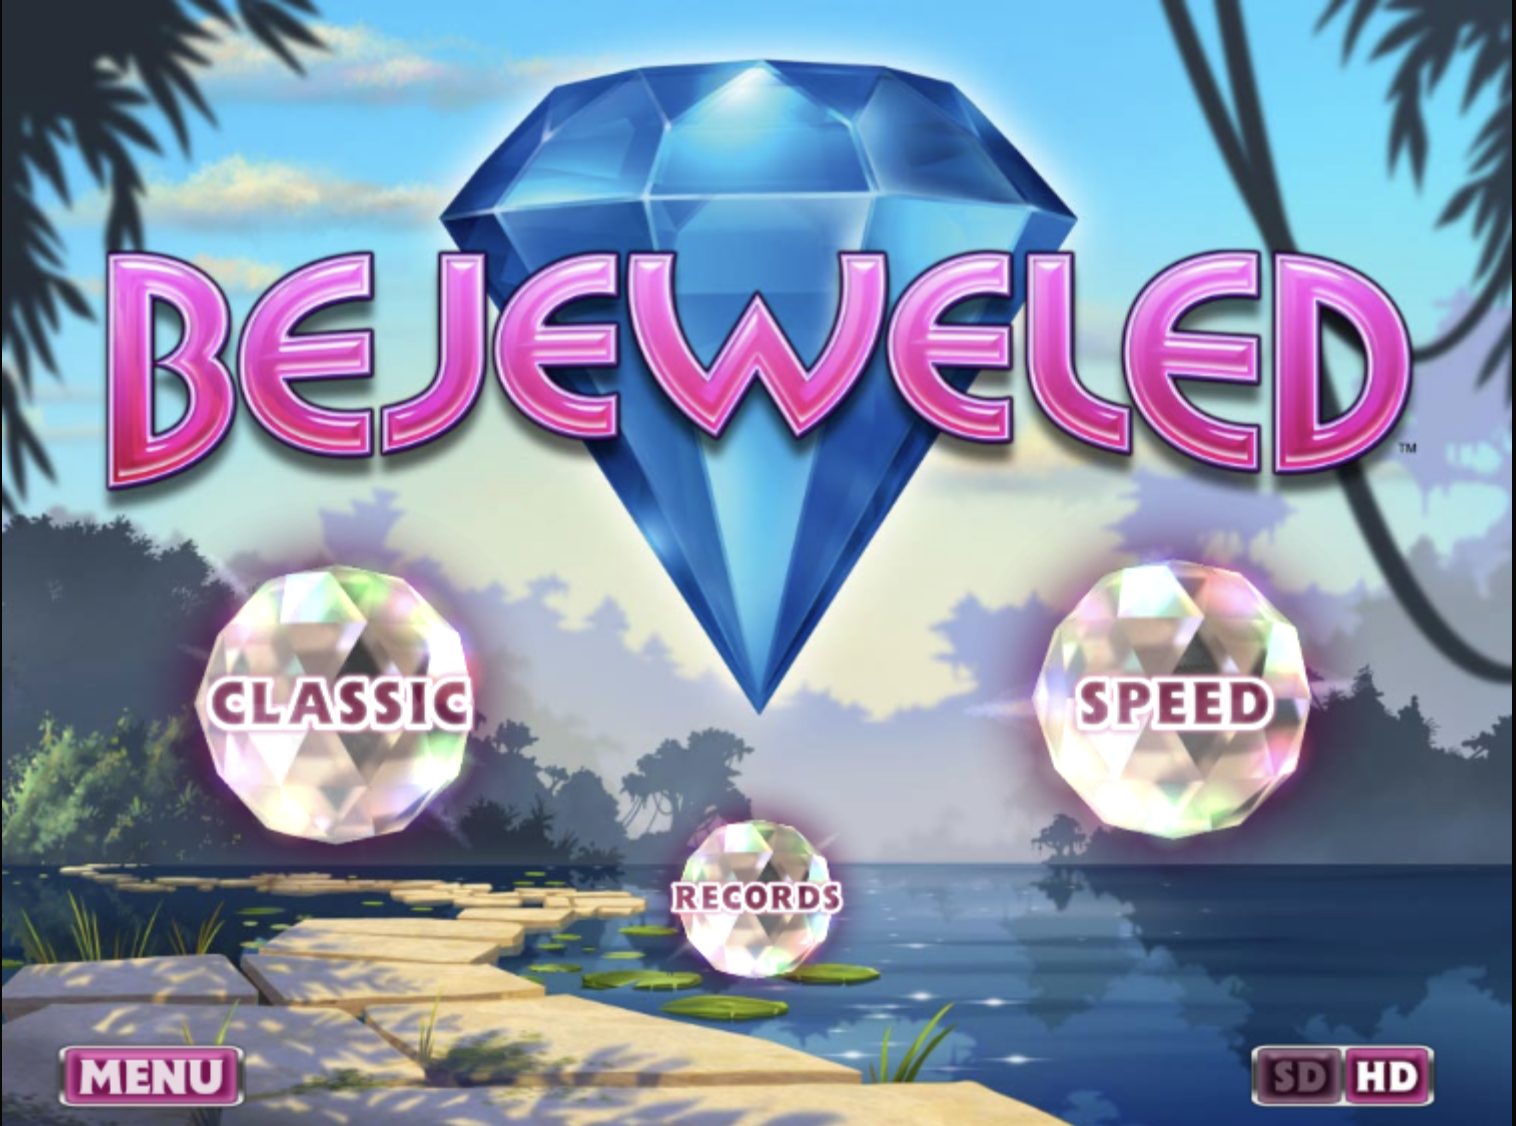 Bejeweled Classic HD by PopCap